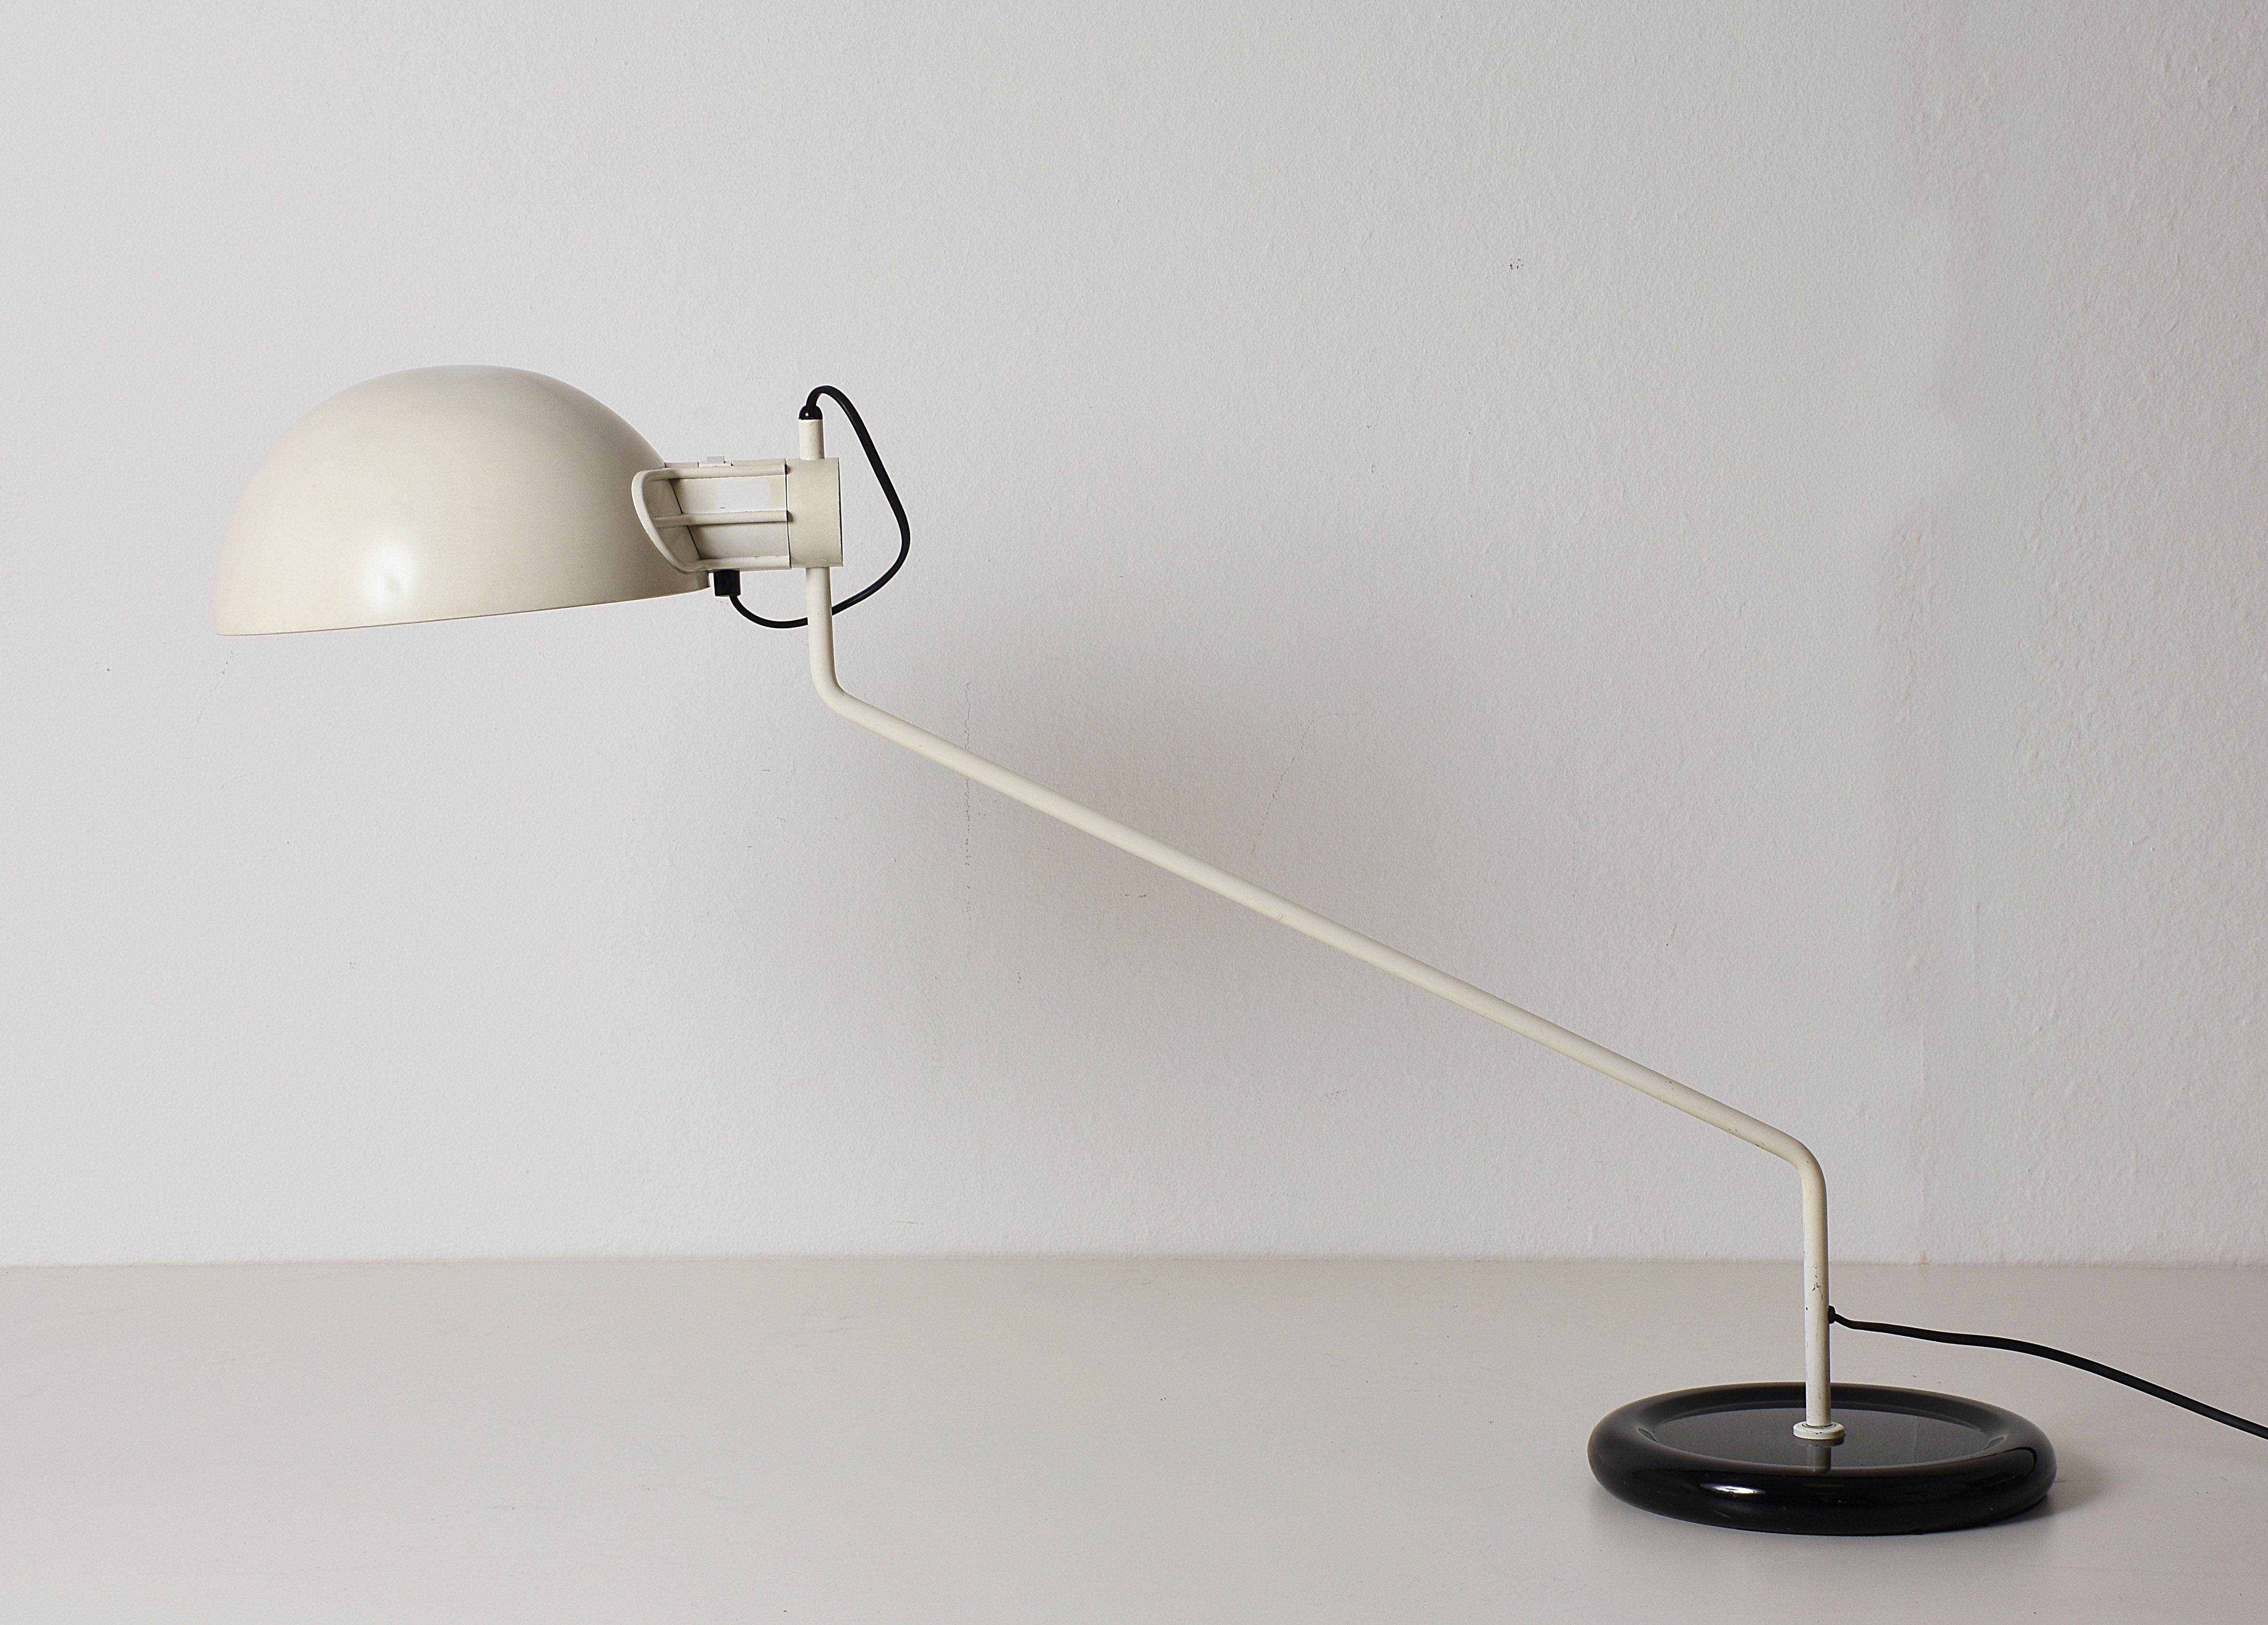 This adjustable desk lamp is from the 1970s Made of plastic and lacquered metal.
It has a heavy base to give stability in black enameled metal.
Measures: Maximum width 90 cm. Height 50 base diameter 25 cm.